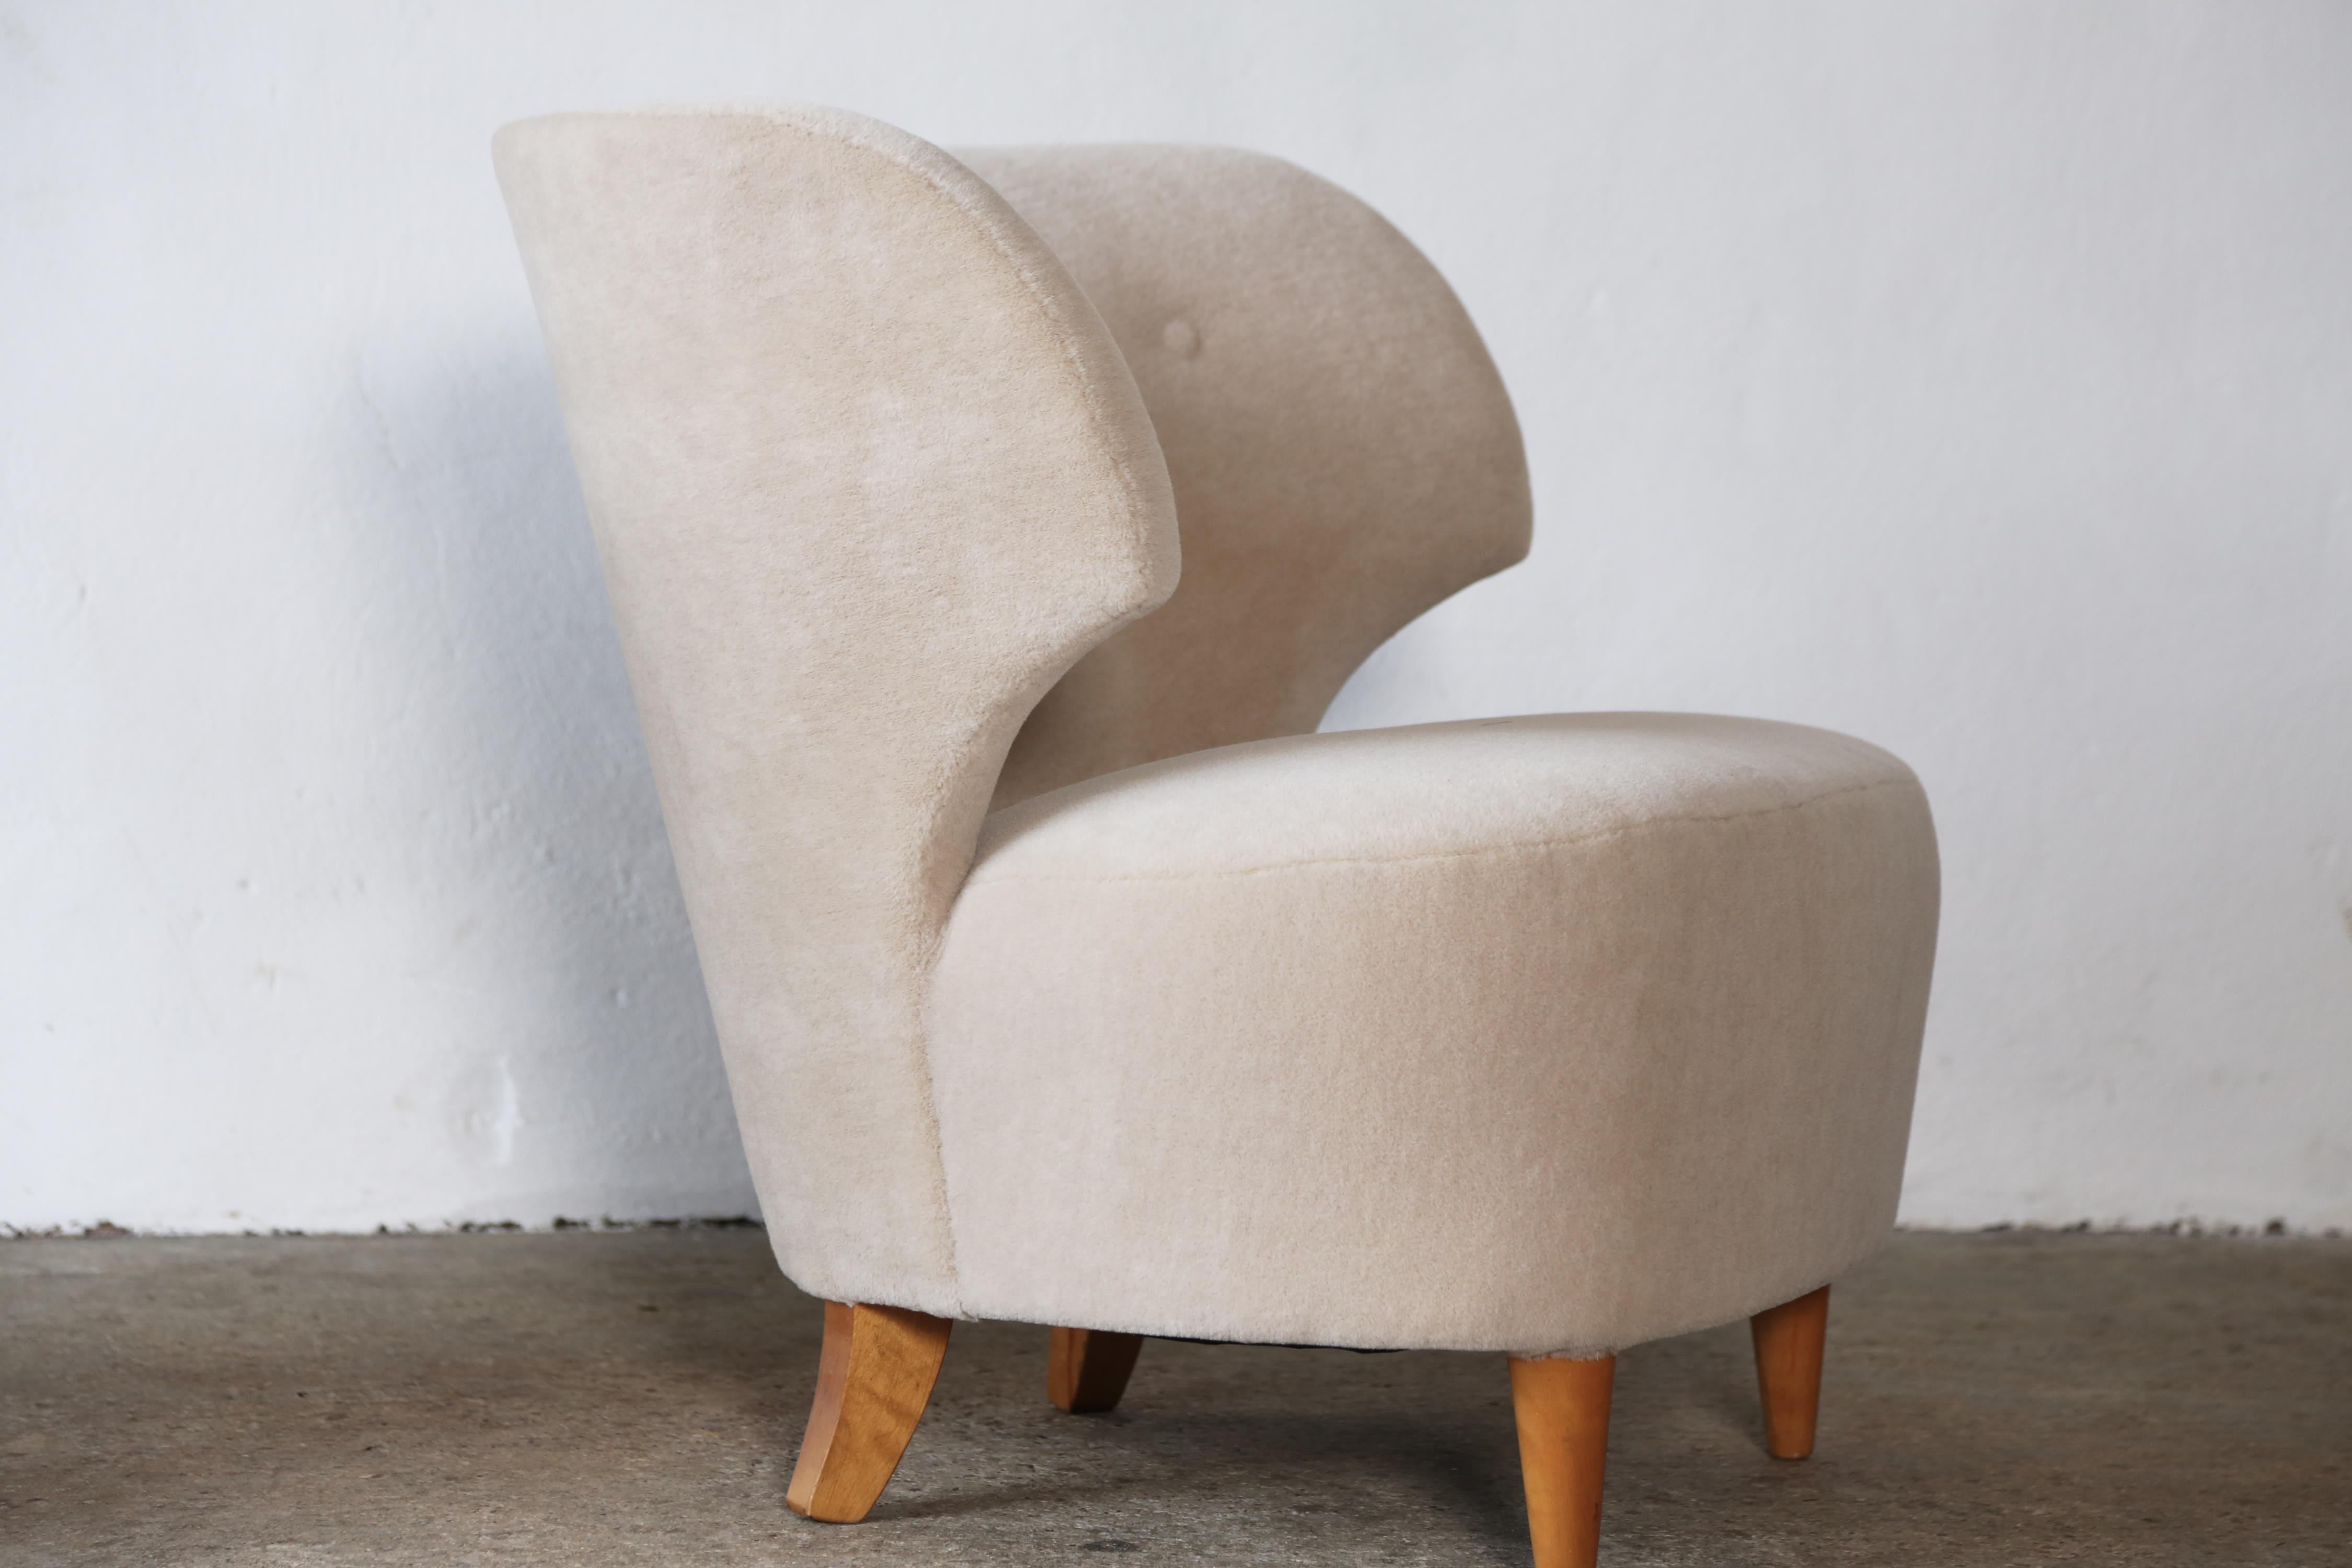 Finnish Pair of Carl-Johan Boman Chairs, Finland, 1940s, Newly Upholstered in Alpaca For Sale